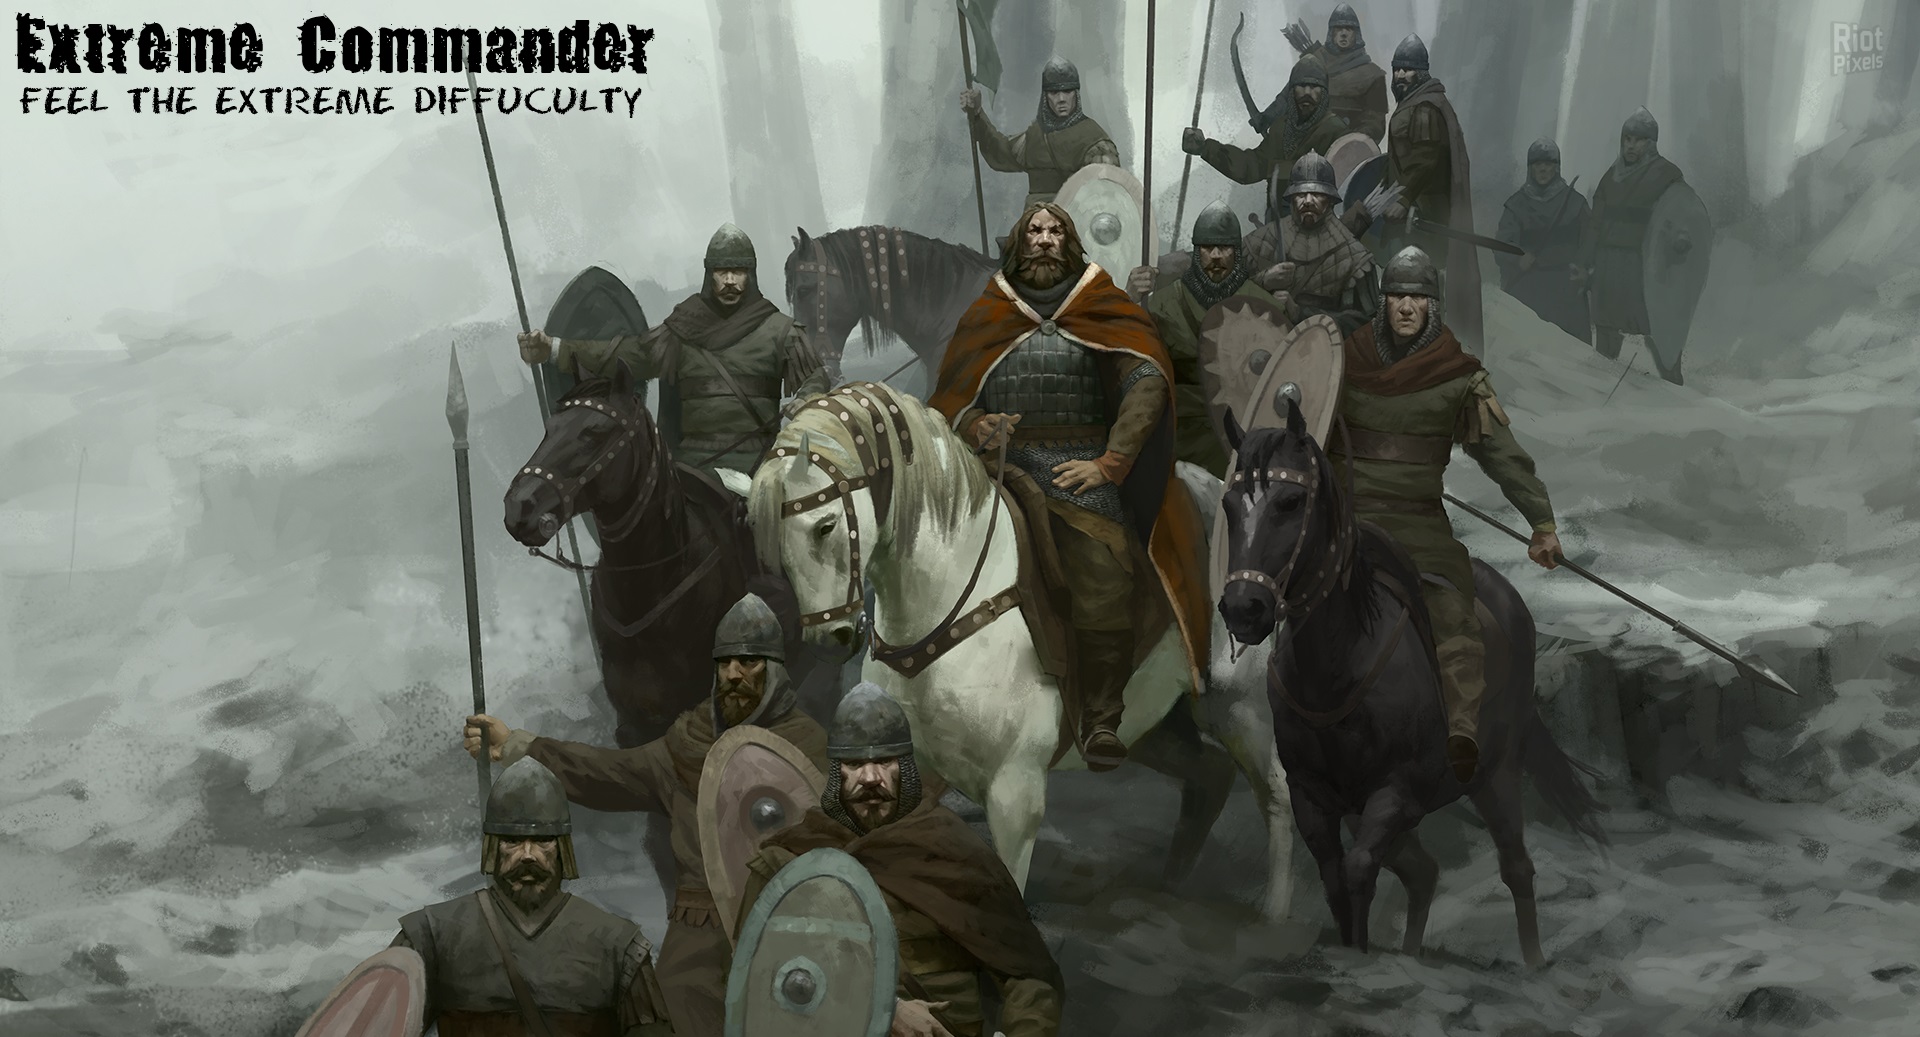 mount and blade warband 1.173